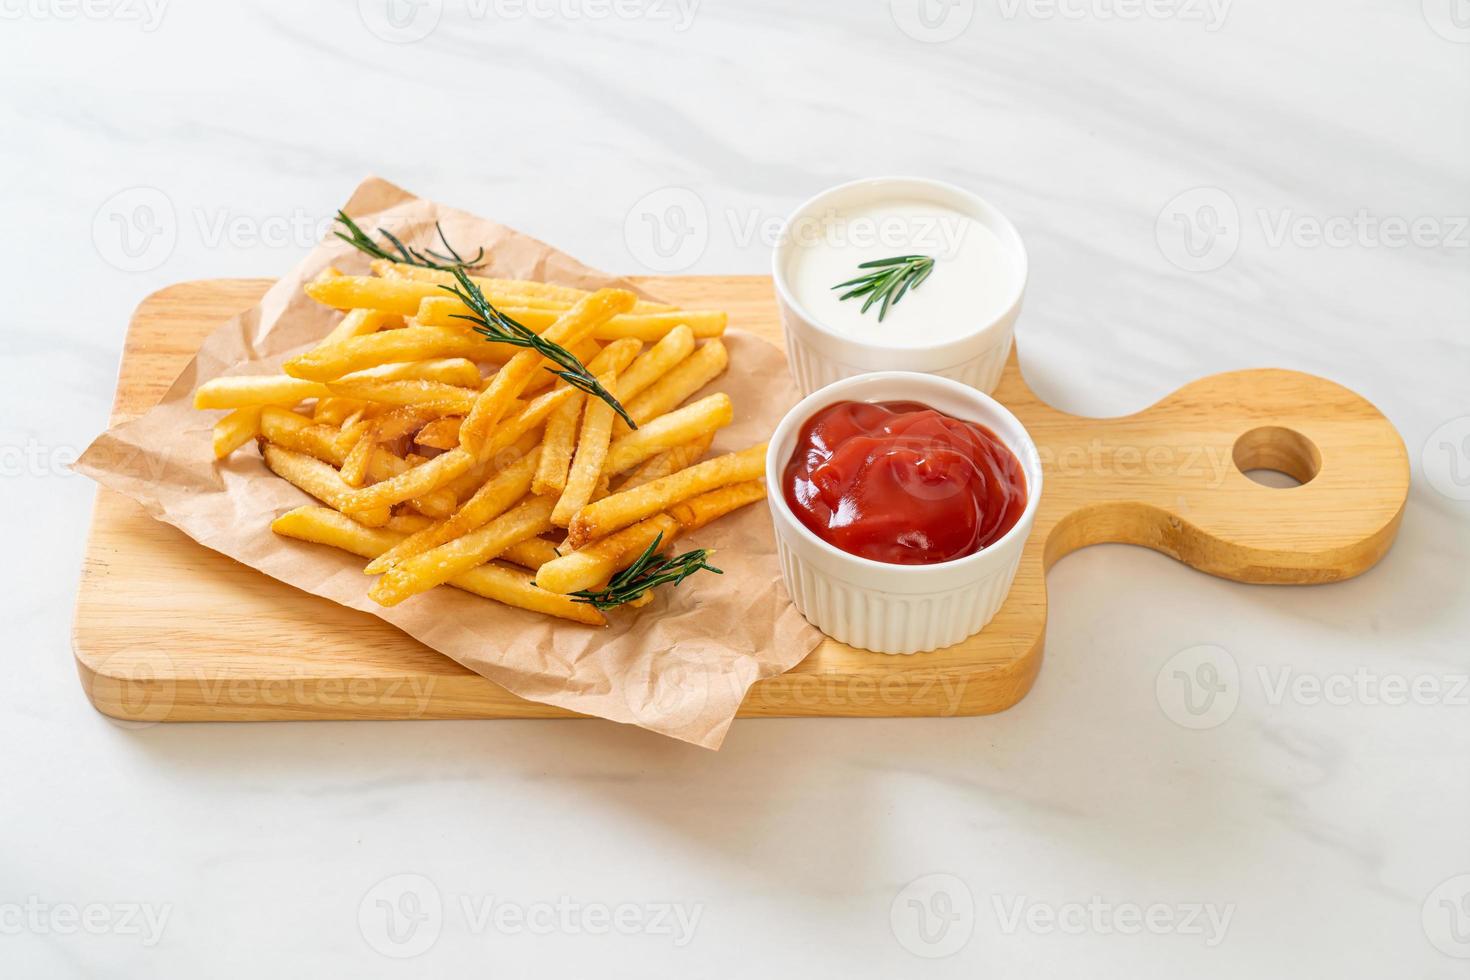 French fries with sour cream and ketchup photo